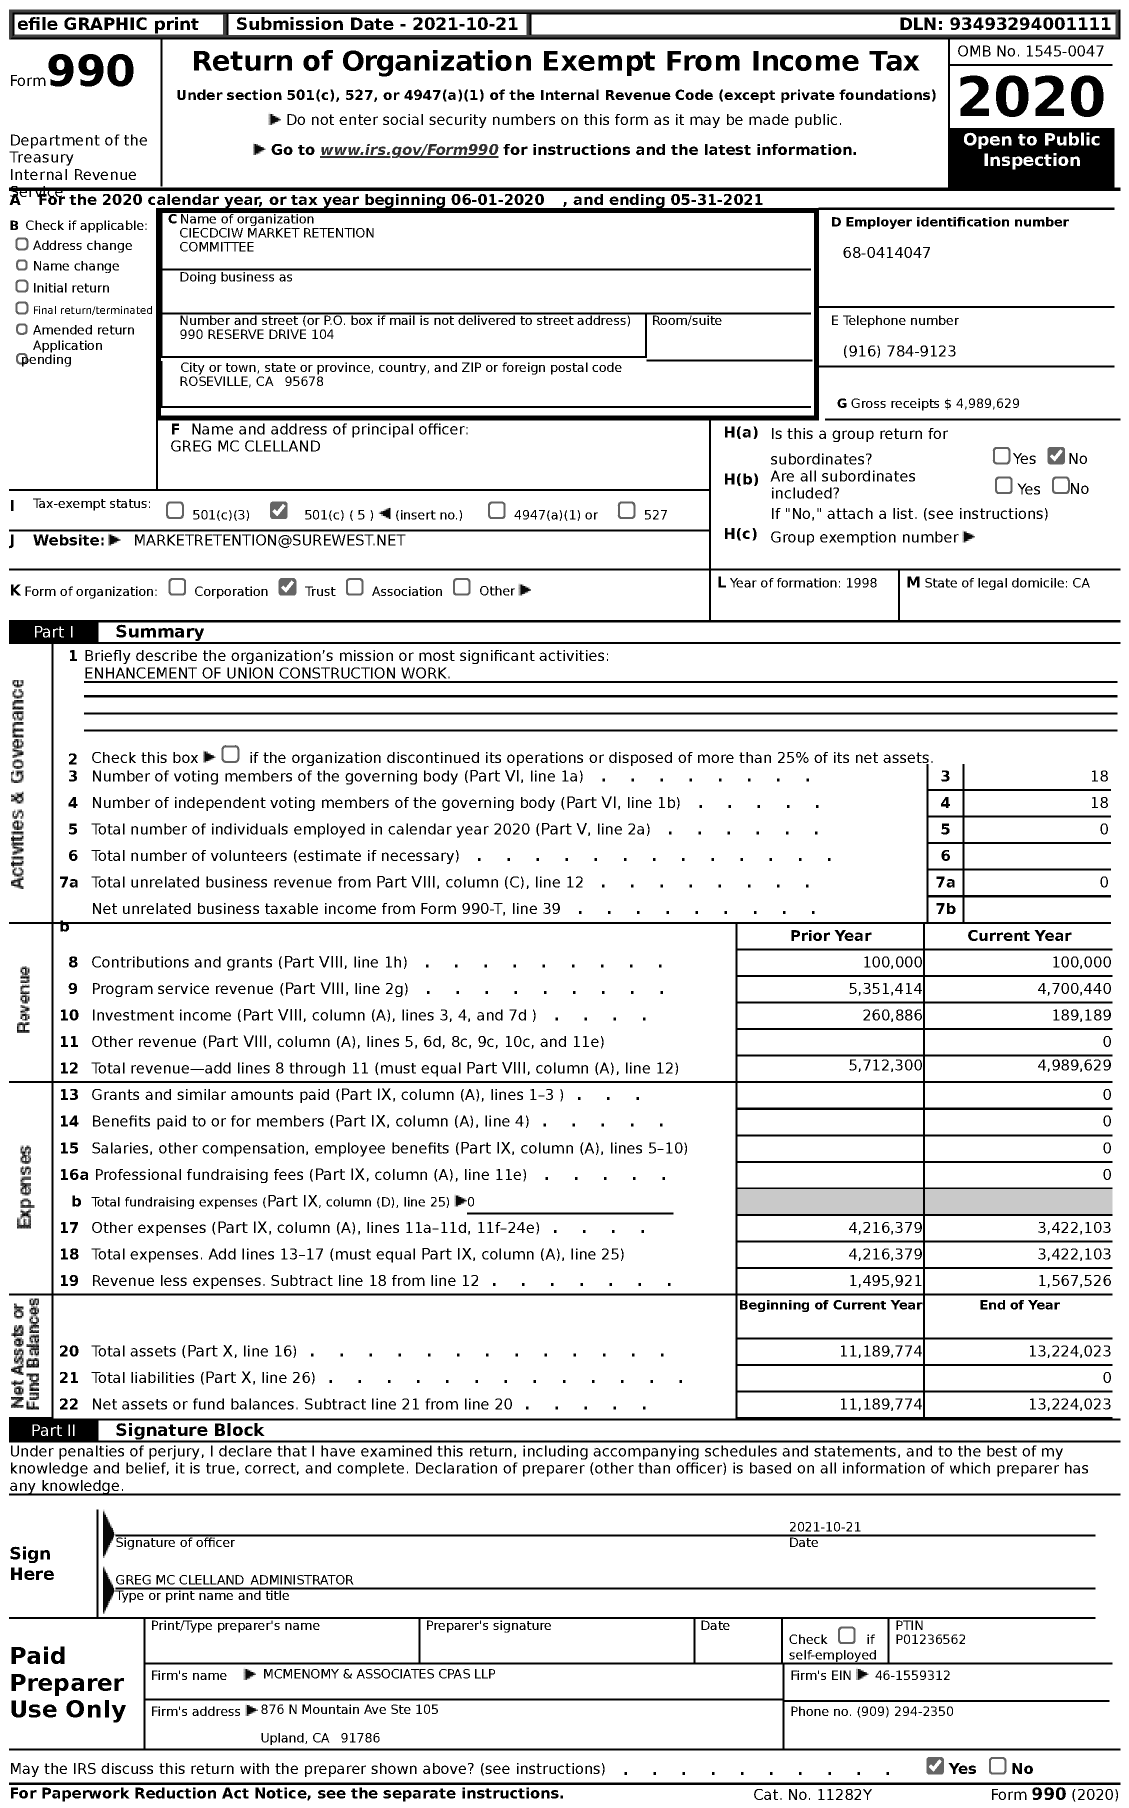 Image of first page of 2020 Form 990 for Ciecdciw Market Retention Committee